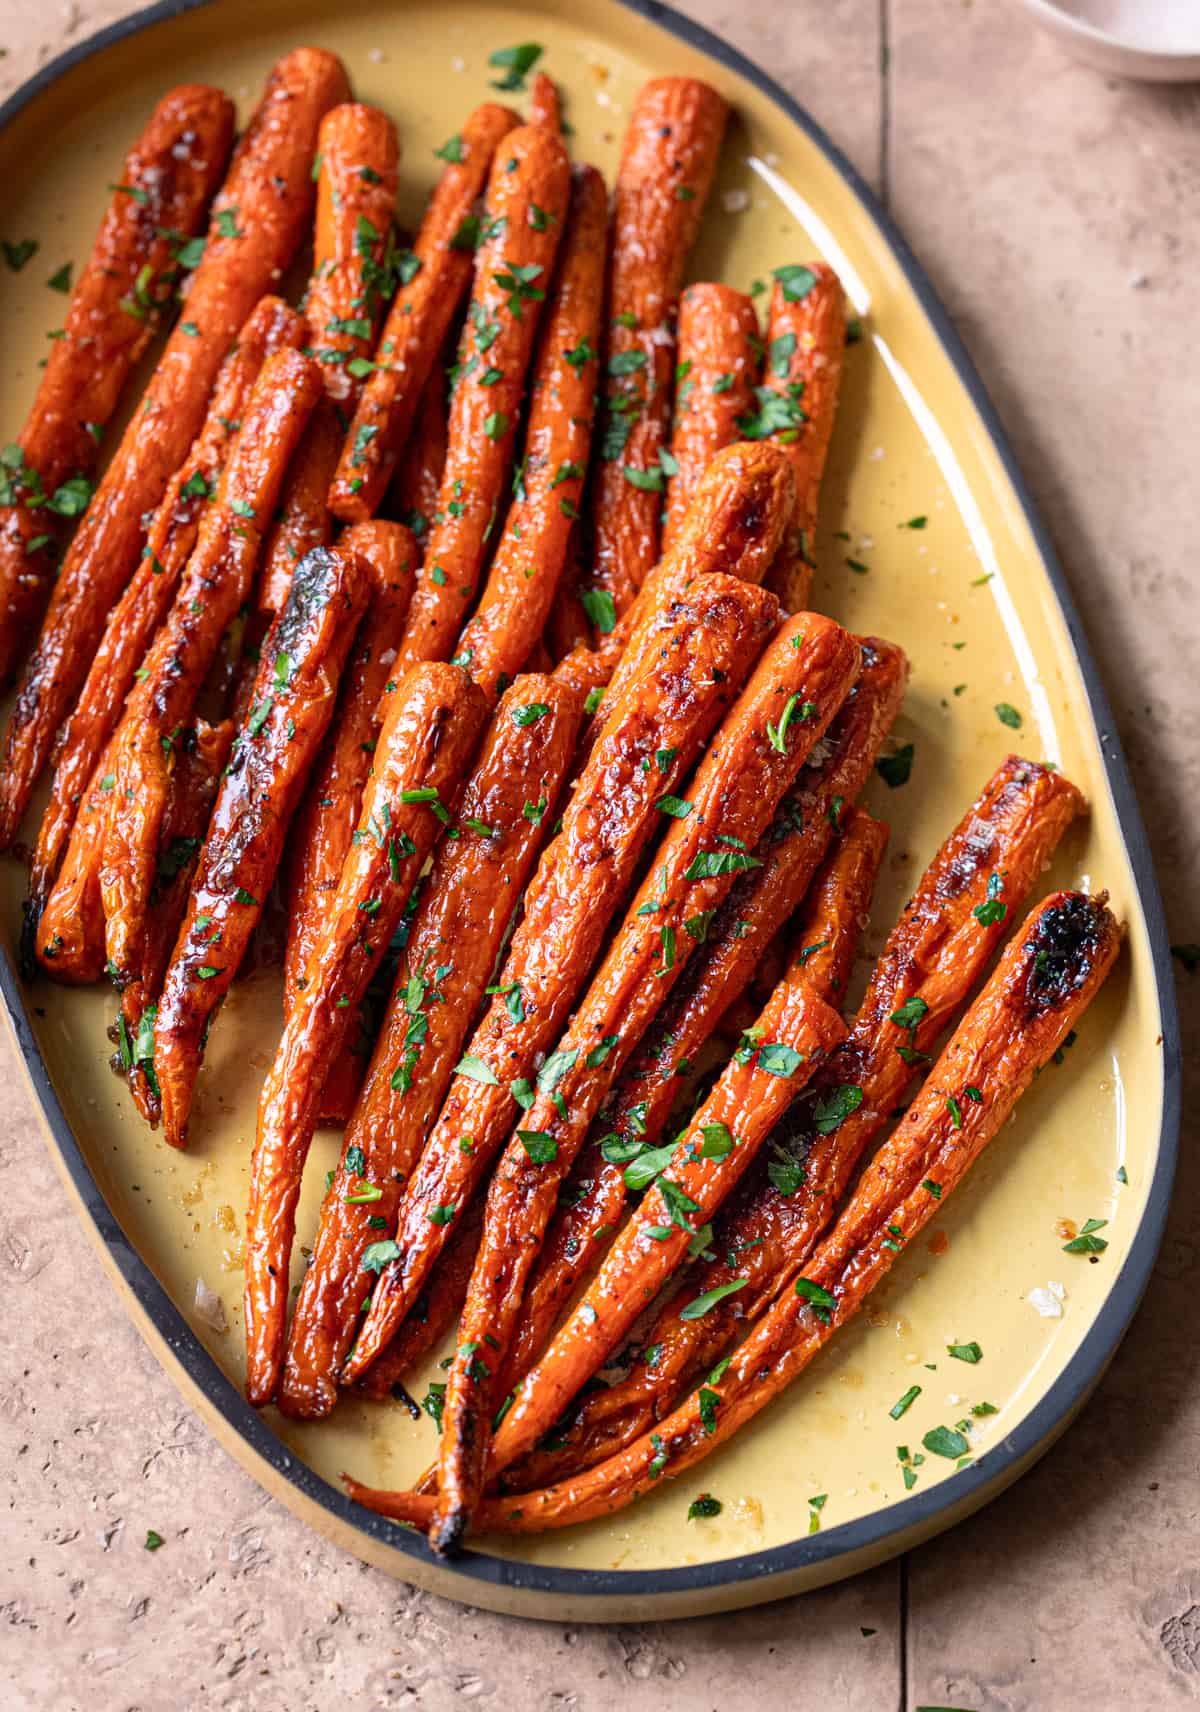 maple roasted carrots garnished with parsley on a yellow serving tray on a light pink tiled surface.